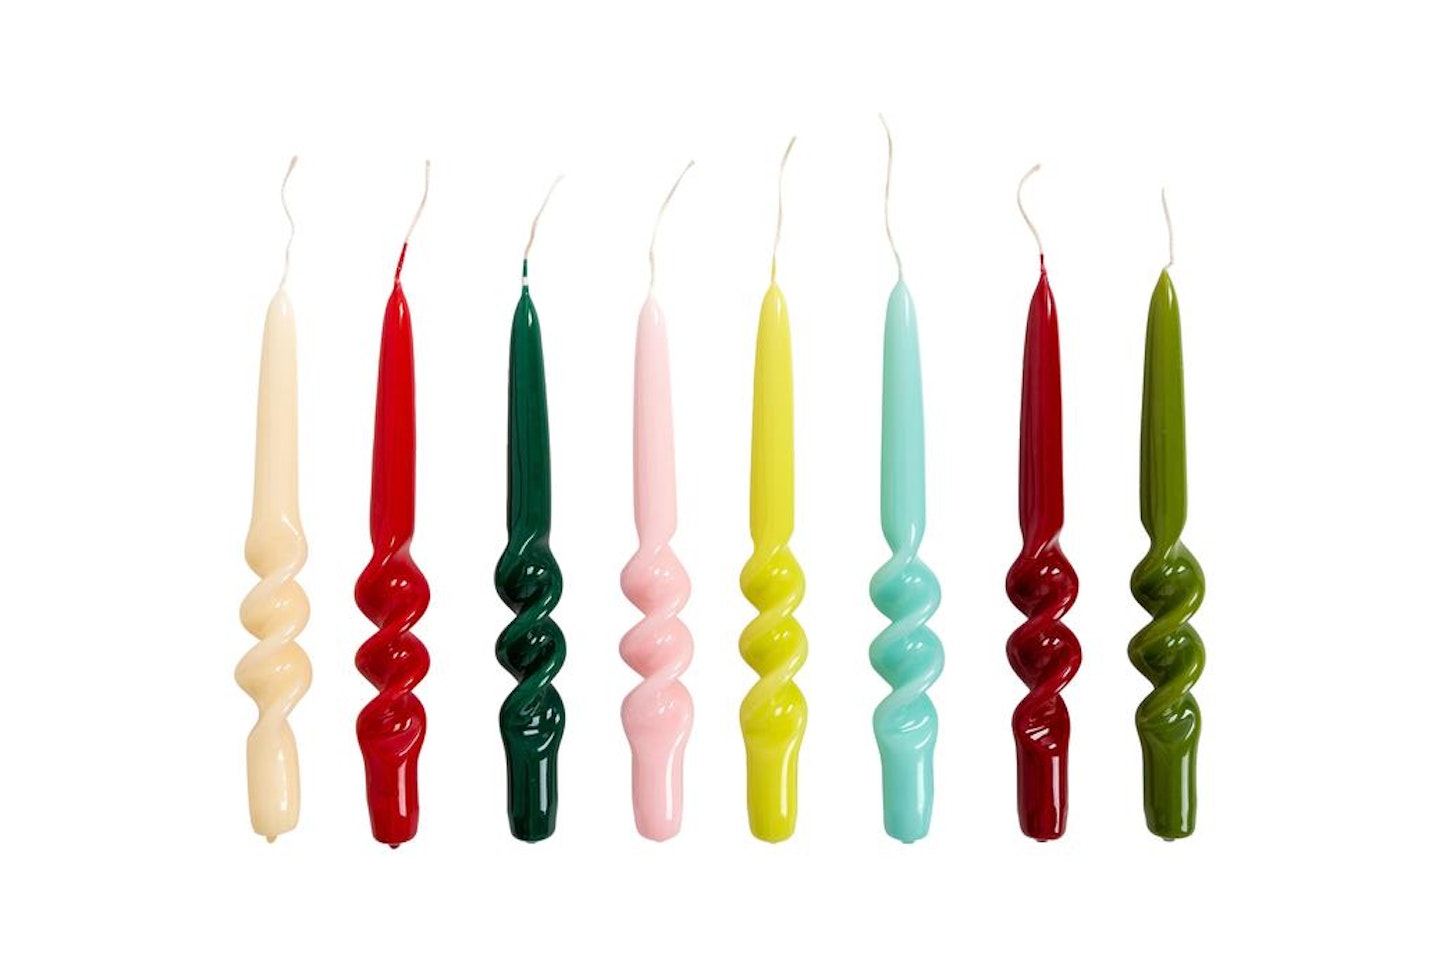 The Edition 94, Swirl Candles 23cm, £6 each